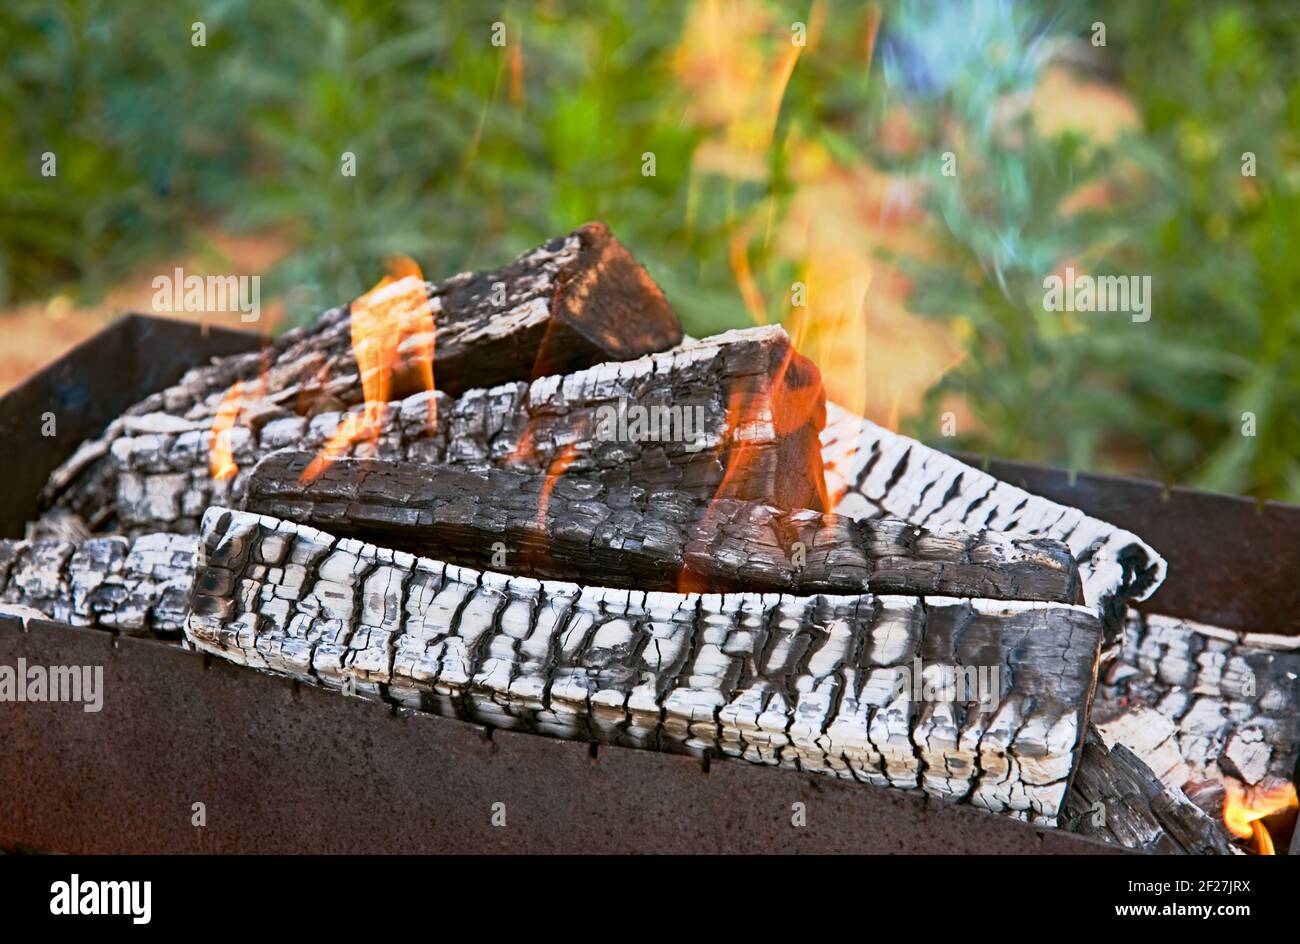 Fire on coals in a mangal before preparation of a shish kebab Stock Photo